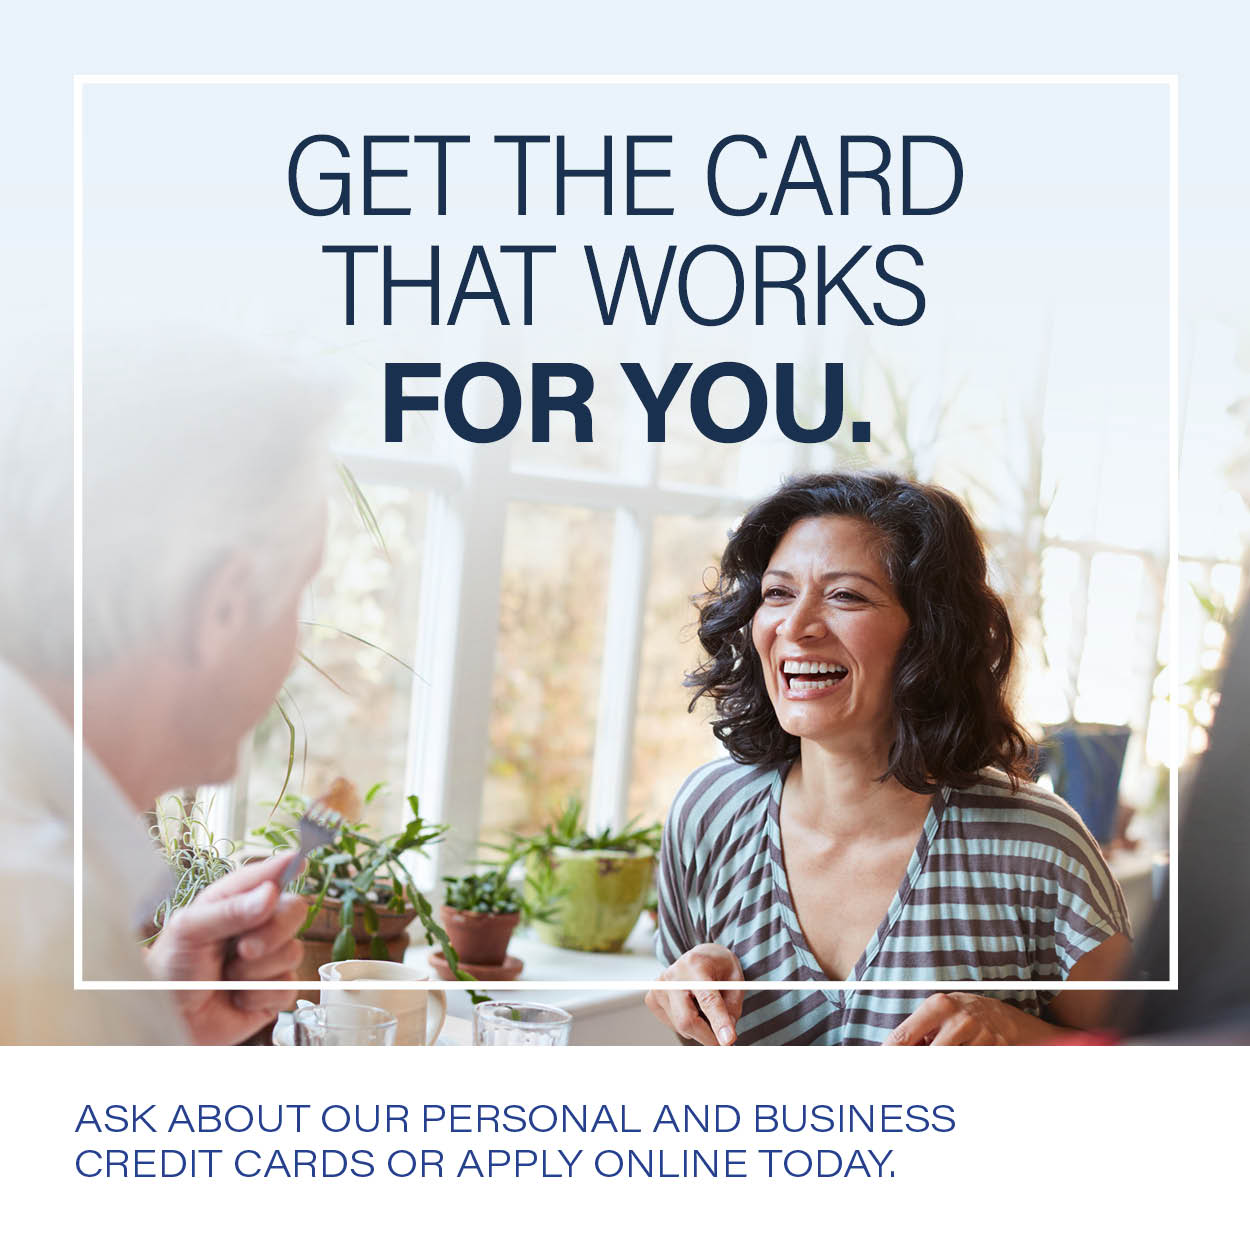 Get the card that works for you.